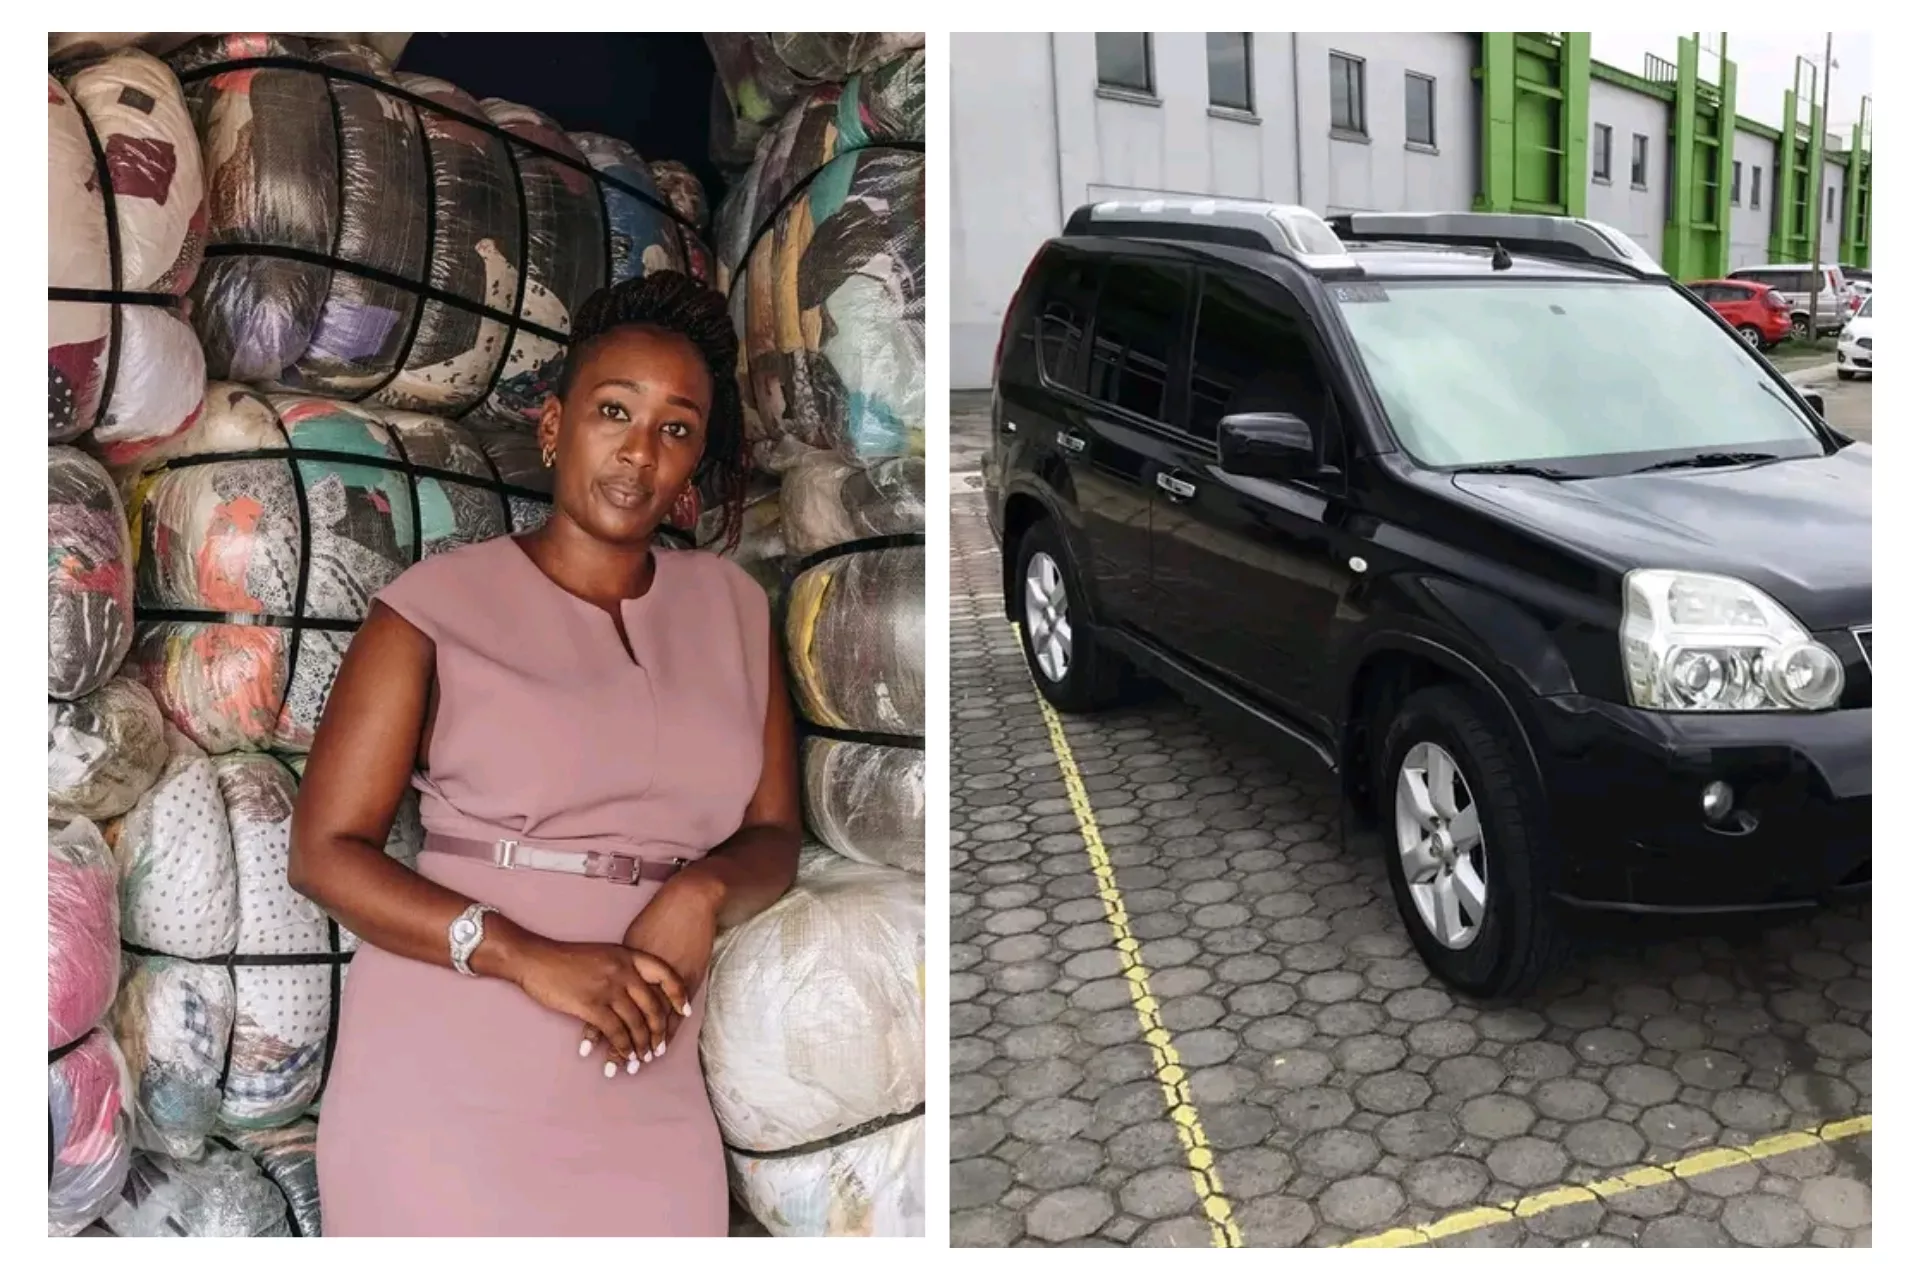 A while ago, Catherine Muringo left Kenyans in shock after she revealed that she bought a Ksh 700K car to three months after starting a Mitumba business. Catherine narrated that her second hand clothers business picked so well that she amassed huge profit with a short time. A section of Kenyans dismissed the claim as untrue. They wondored how one can take such a hug step in so short period. How did Catherine Muringo start Mitumba business Catherine Muringo got into second hand clothes business 9 years ago, when few players where in the market . While speaking in an Interview with the Standard, Catherine revealed that she decided to venture into Mitumba clothes after her Salon business collapsed. Muringo was devastated and hopeless after her Salon business failed to thrive. She had only Ksh.2000, which she used as starting capital. Luckily, there were few players into the Mitumba business and hence it was a walk in the park. "I began the business with 2000 shillings. At the time we did not experience much challenge because very few people were into the business," she said. Armed with Ksh. 2000, Catherine went to Korogocho market and picked kids clothes. To her surprise, the clothes made Ksh.9000. Catherine later met a friendly dealer who taught him various varieties of bales.This made her business more profitable. Catherine Muringo now runs a multi-millions Mitumba business in Gikomba and imports bales from abroad. “I prefer Canadian bales because they are clean. I also source from Australia, the UK, very little from the US and rarely from China. Before, I did not know that there was a difference between China, Canadian, the UK or Australian bales, I just used to buy them randomly,” she said. Nissan X-TRAIL CAR in 3 months While in an interview with NTV, Catherine Muringo sparked a buzz among Kenyan after she said she bought her first car three months after getting into Mitumba business. Catherine said that she made huge profit with a short period, that she acquired a Ksh. 700K car. "Things were so good. Within 3 months I was able to purchase a second hand Nissan X-TRAIL worth Ksh.700K," she noted.